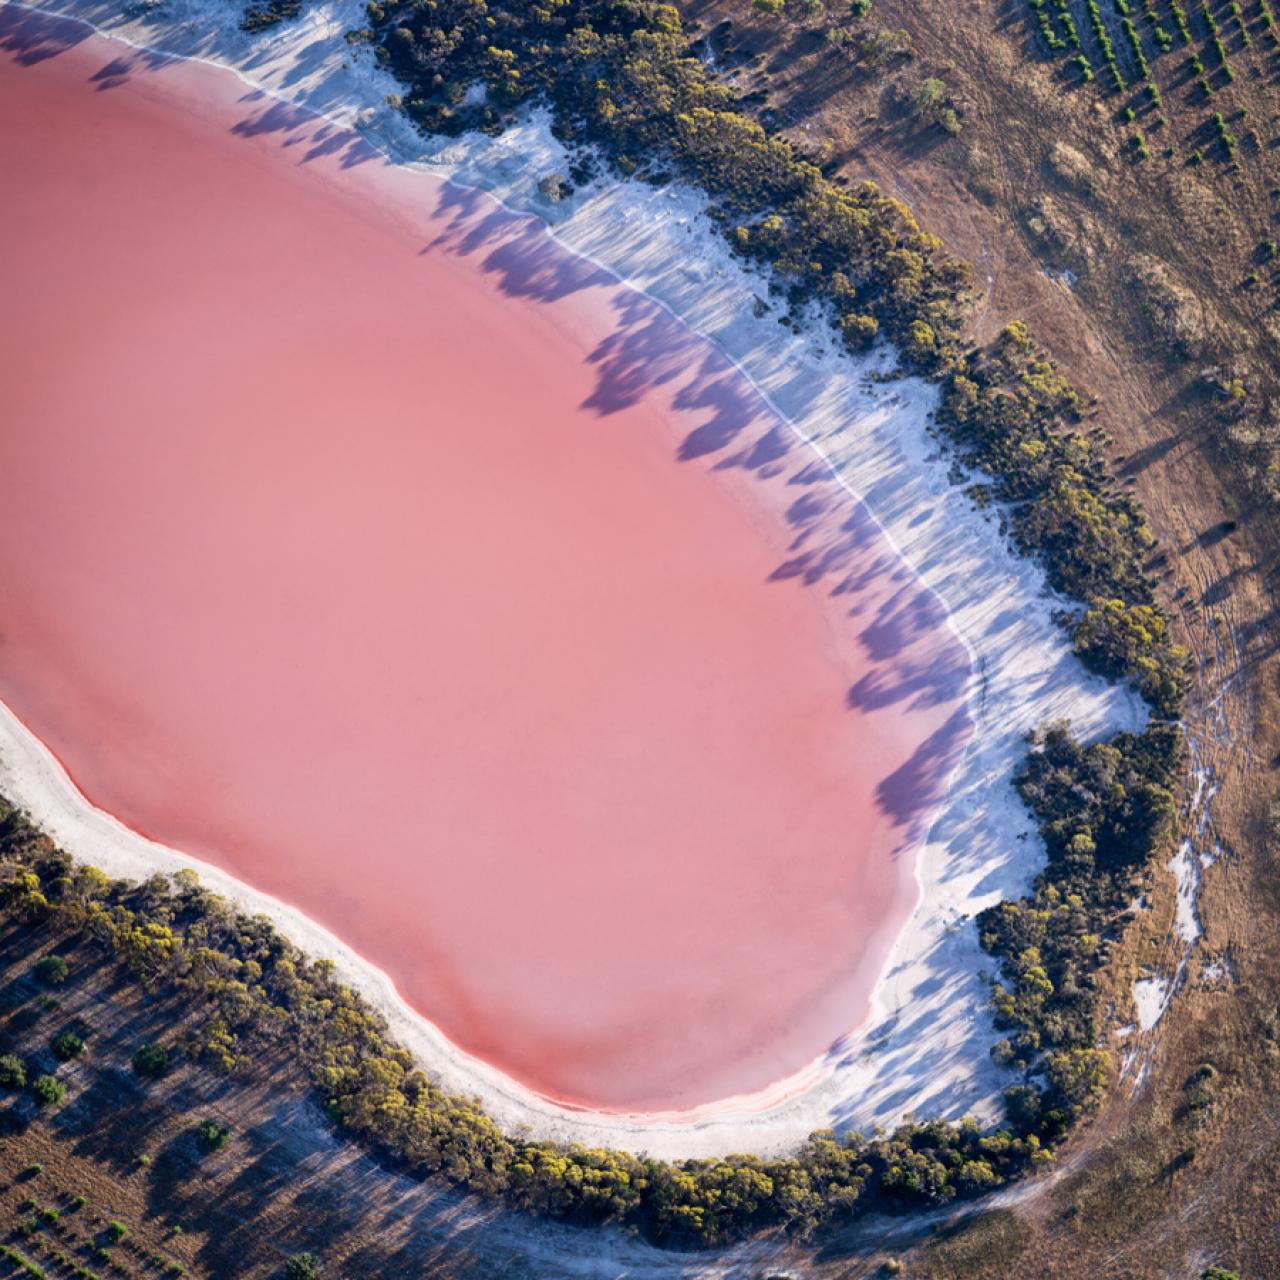 Discovery Why Australia Has Bubblegum Pink Lakes, Latest Science News and  Articles